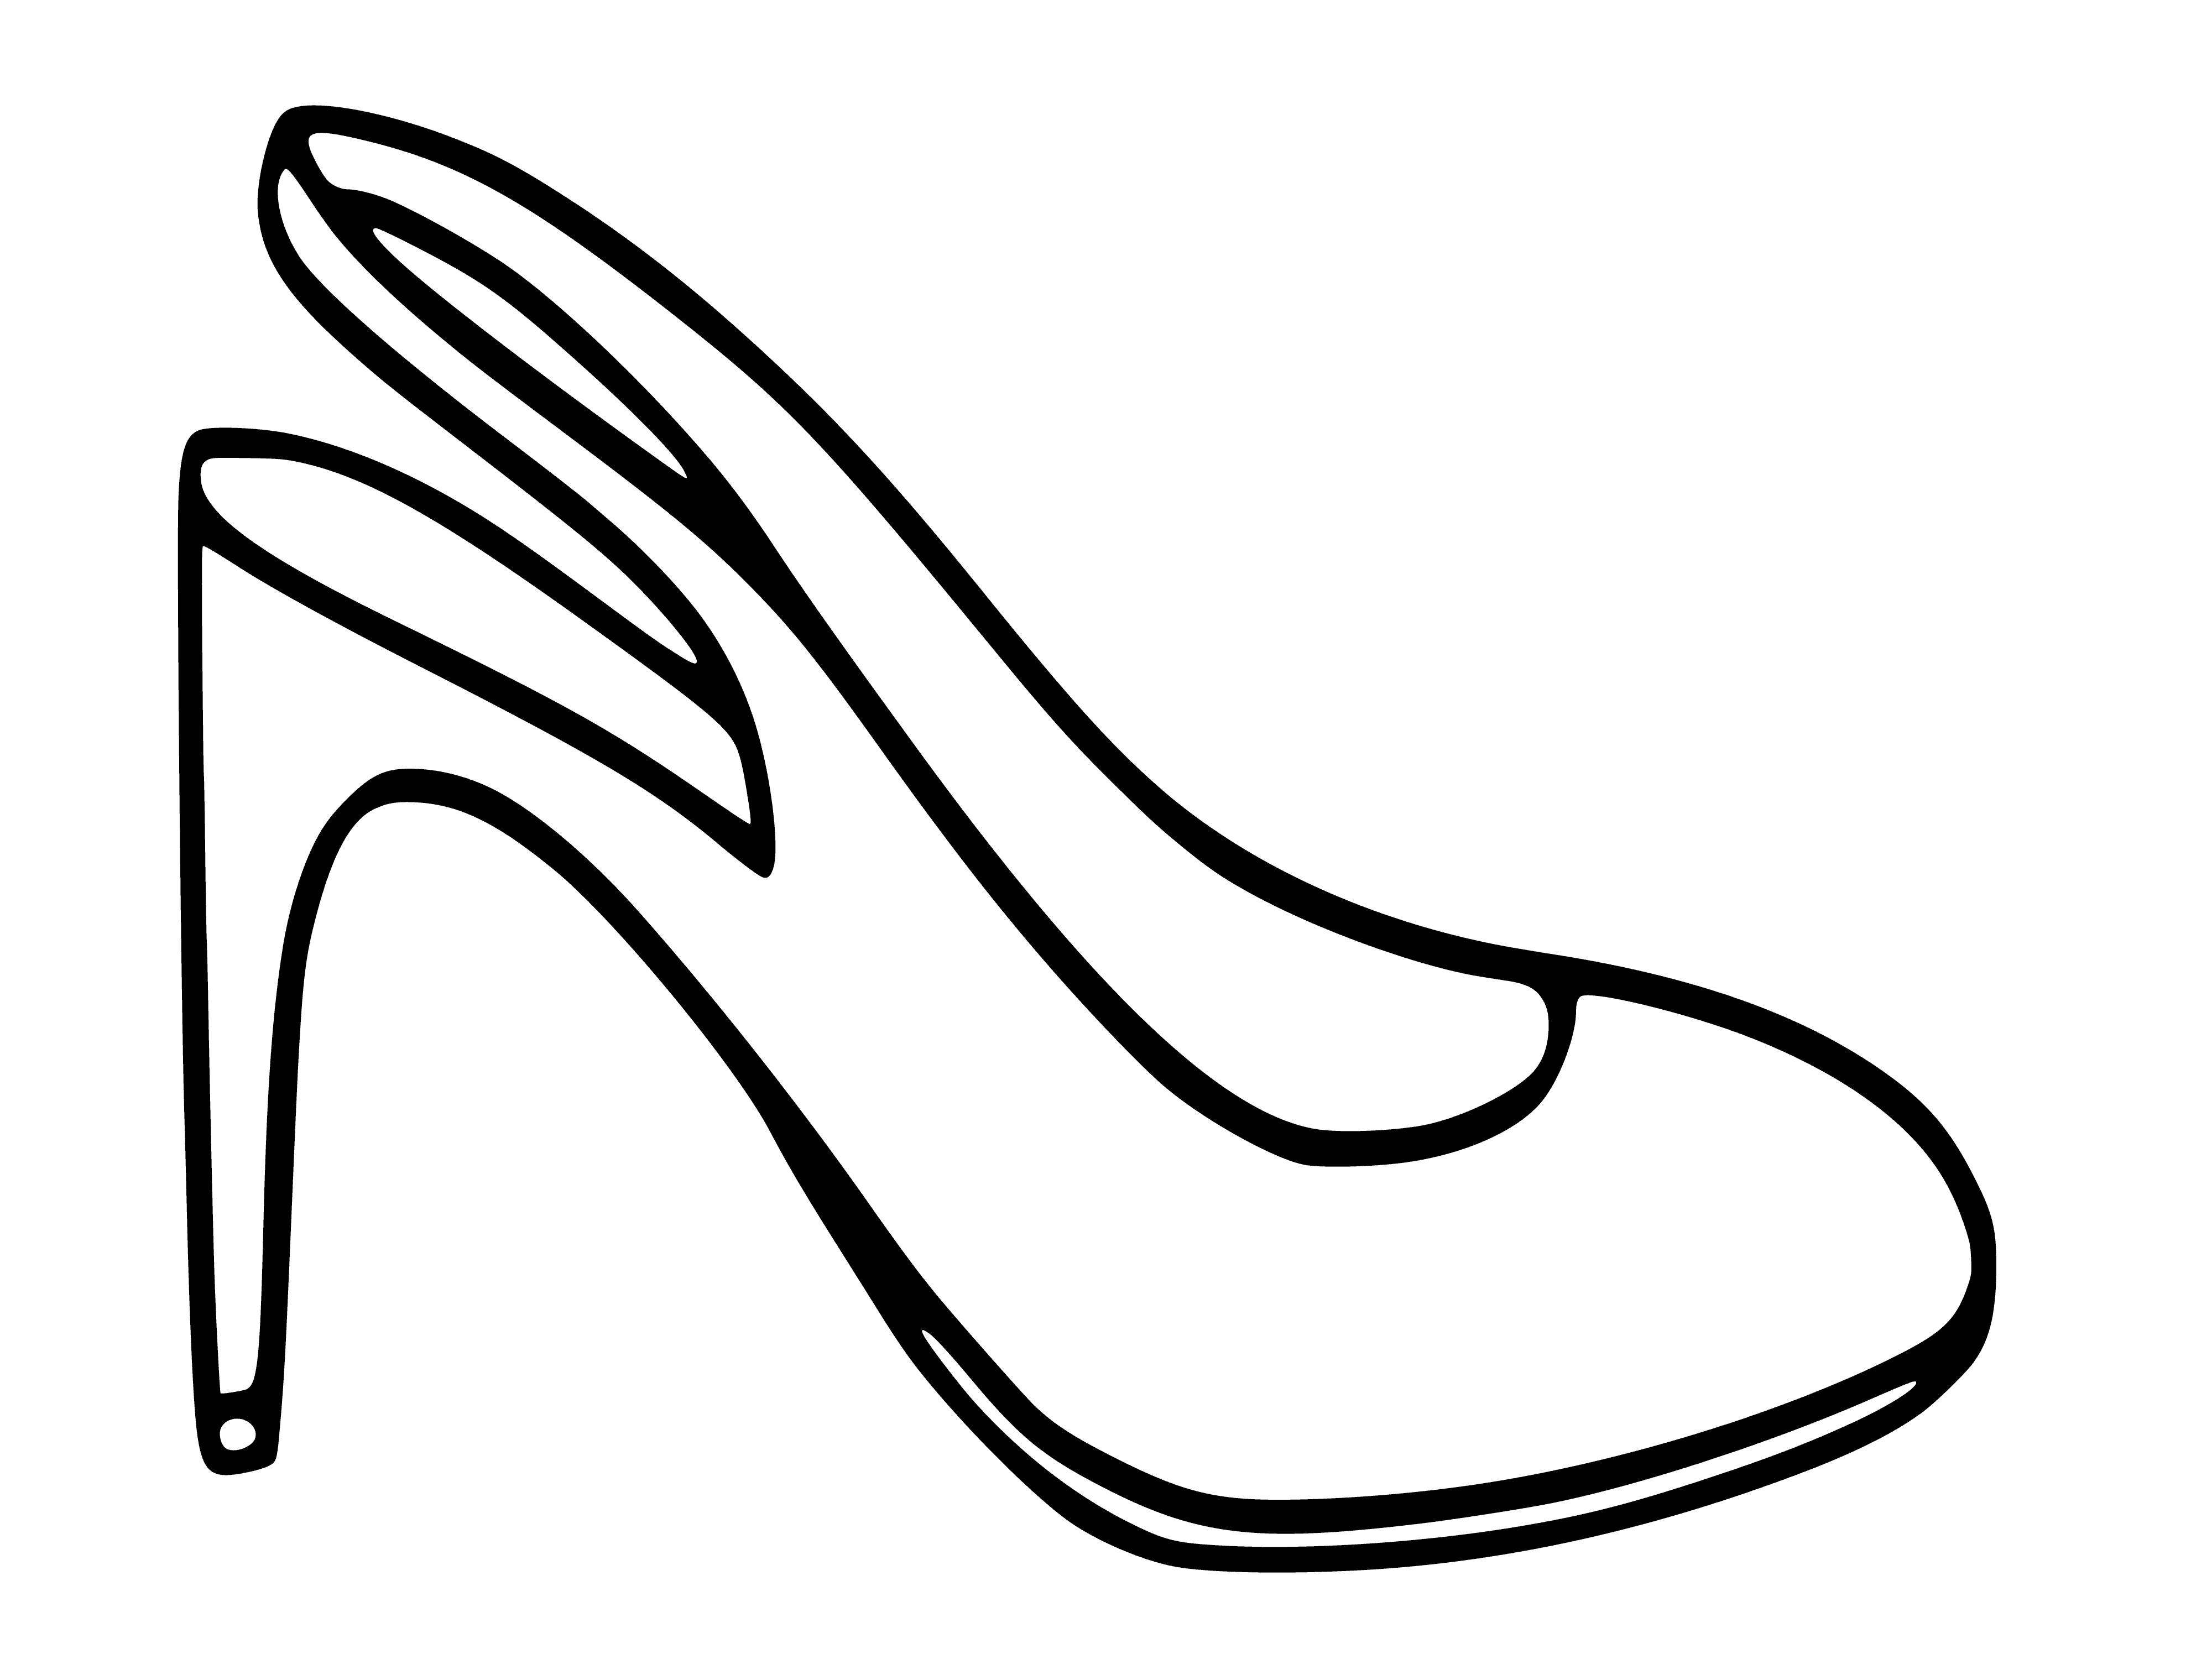 coloring page: A black, pointy-toed, leather heel with a strap across the top on a white background.